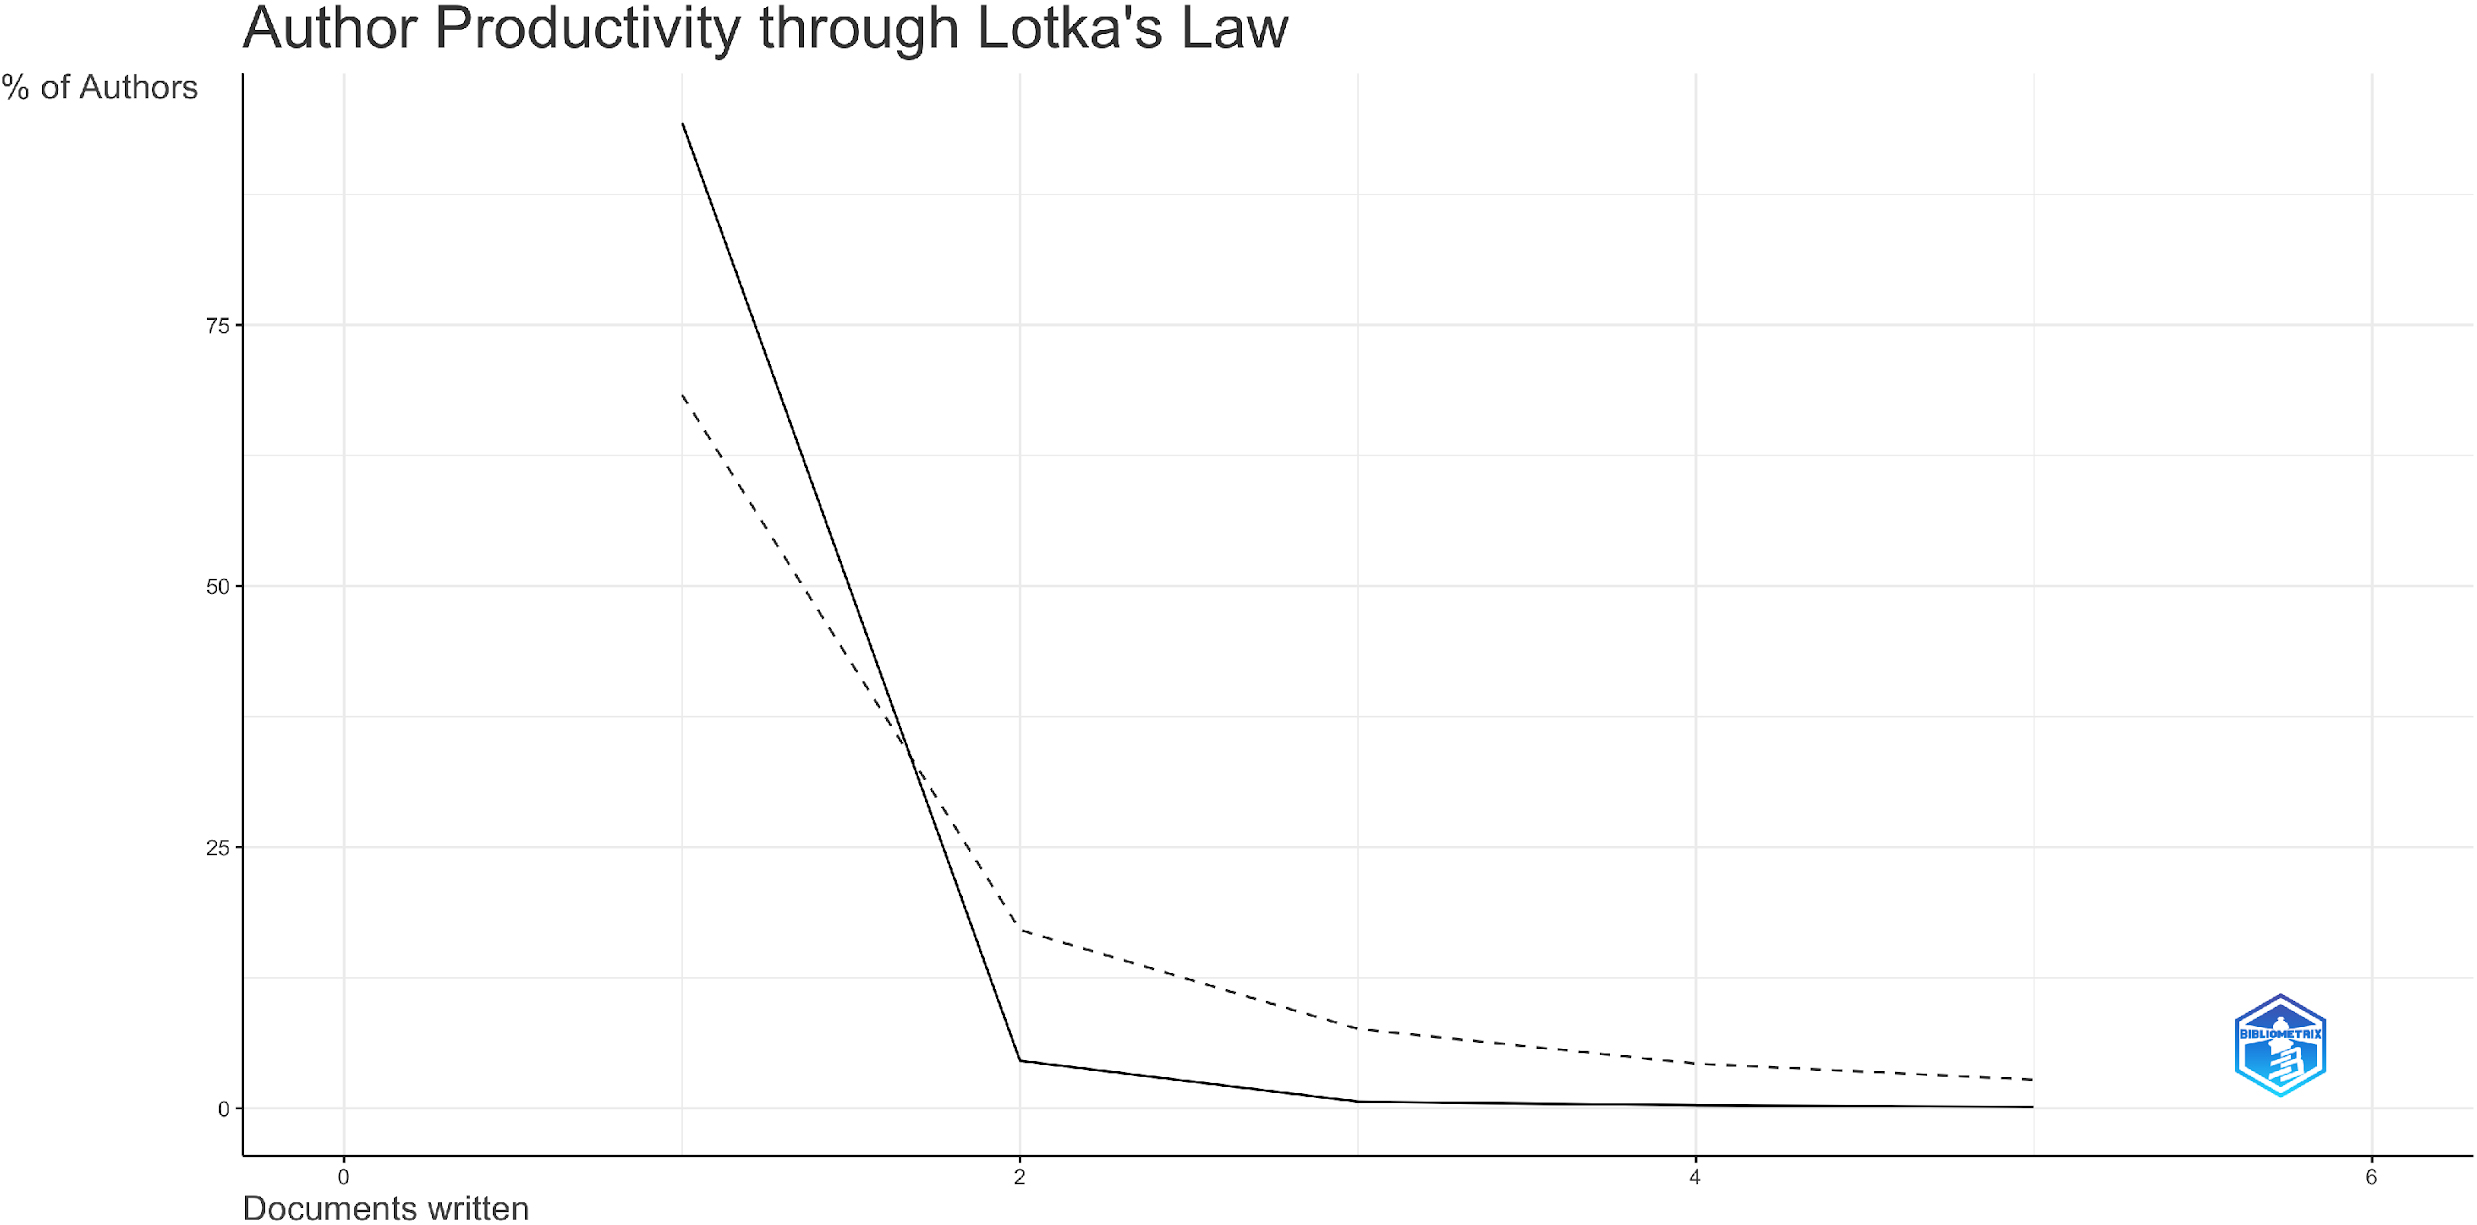 Lotka’s law applied to the sample.